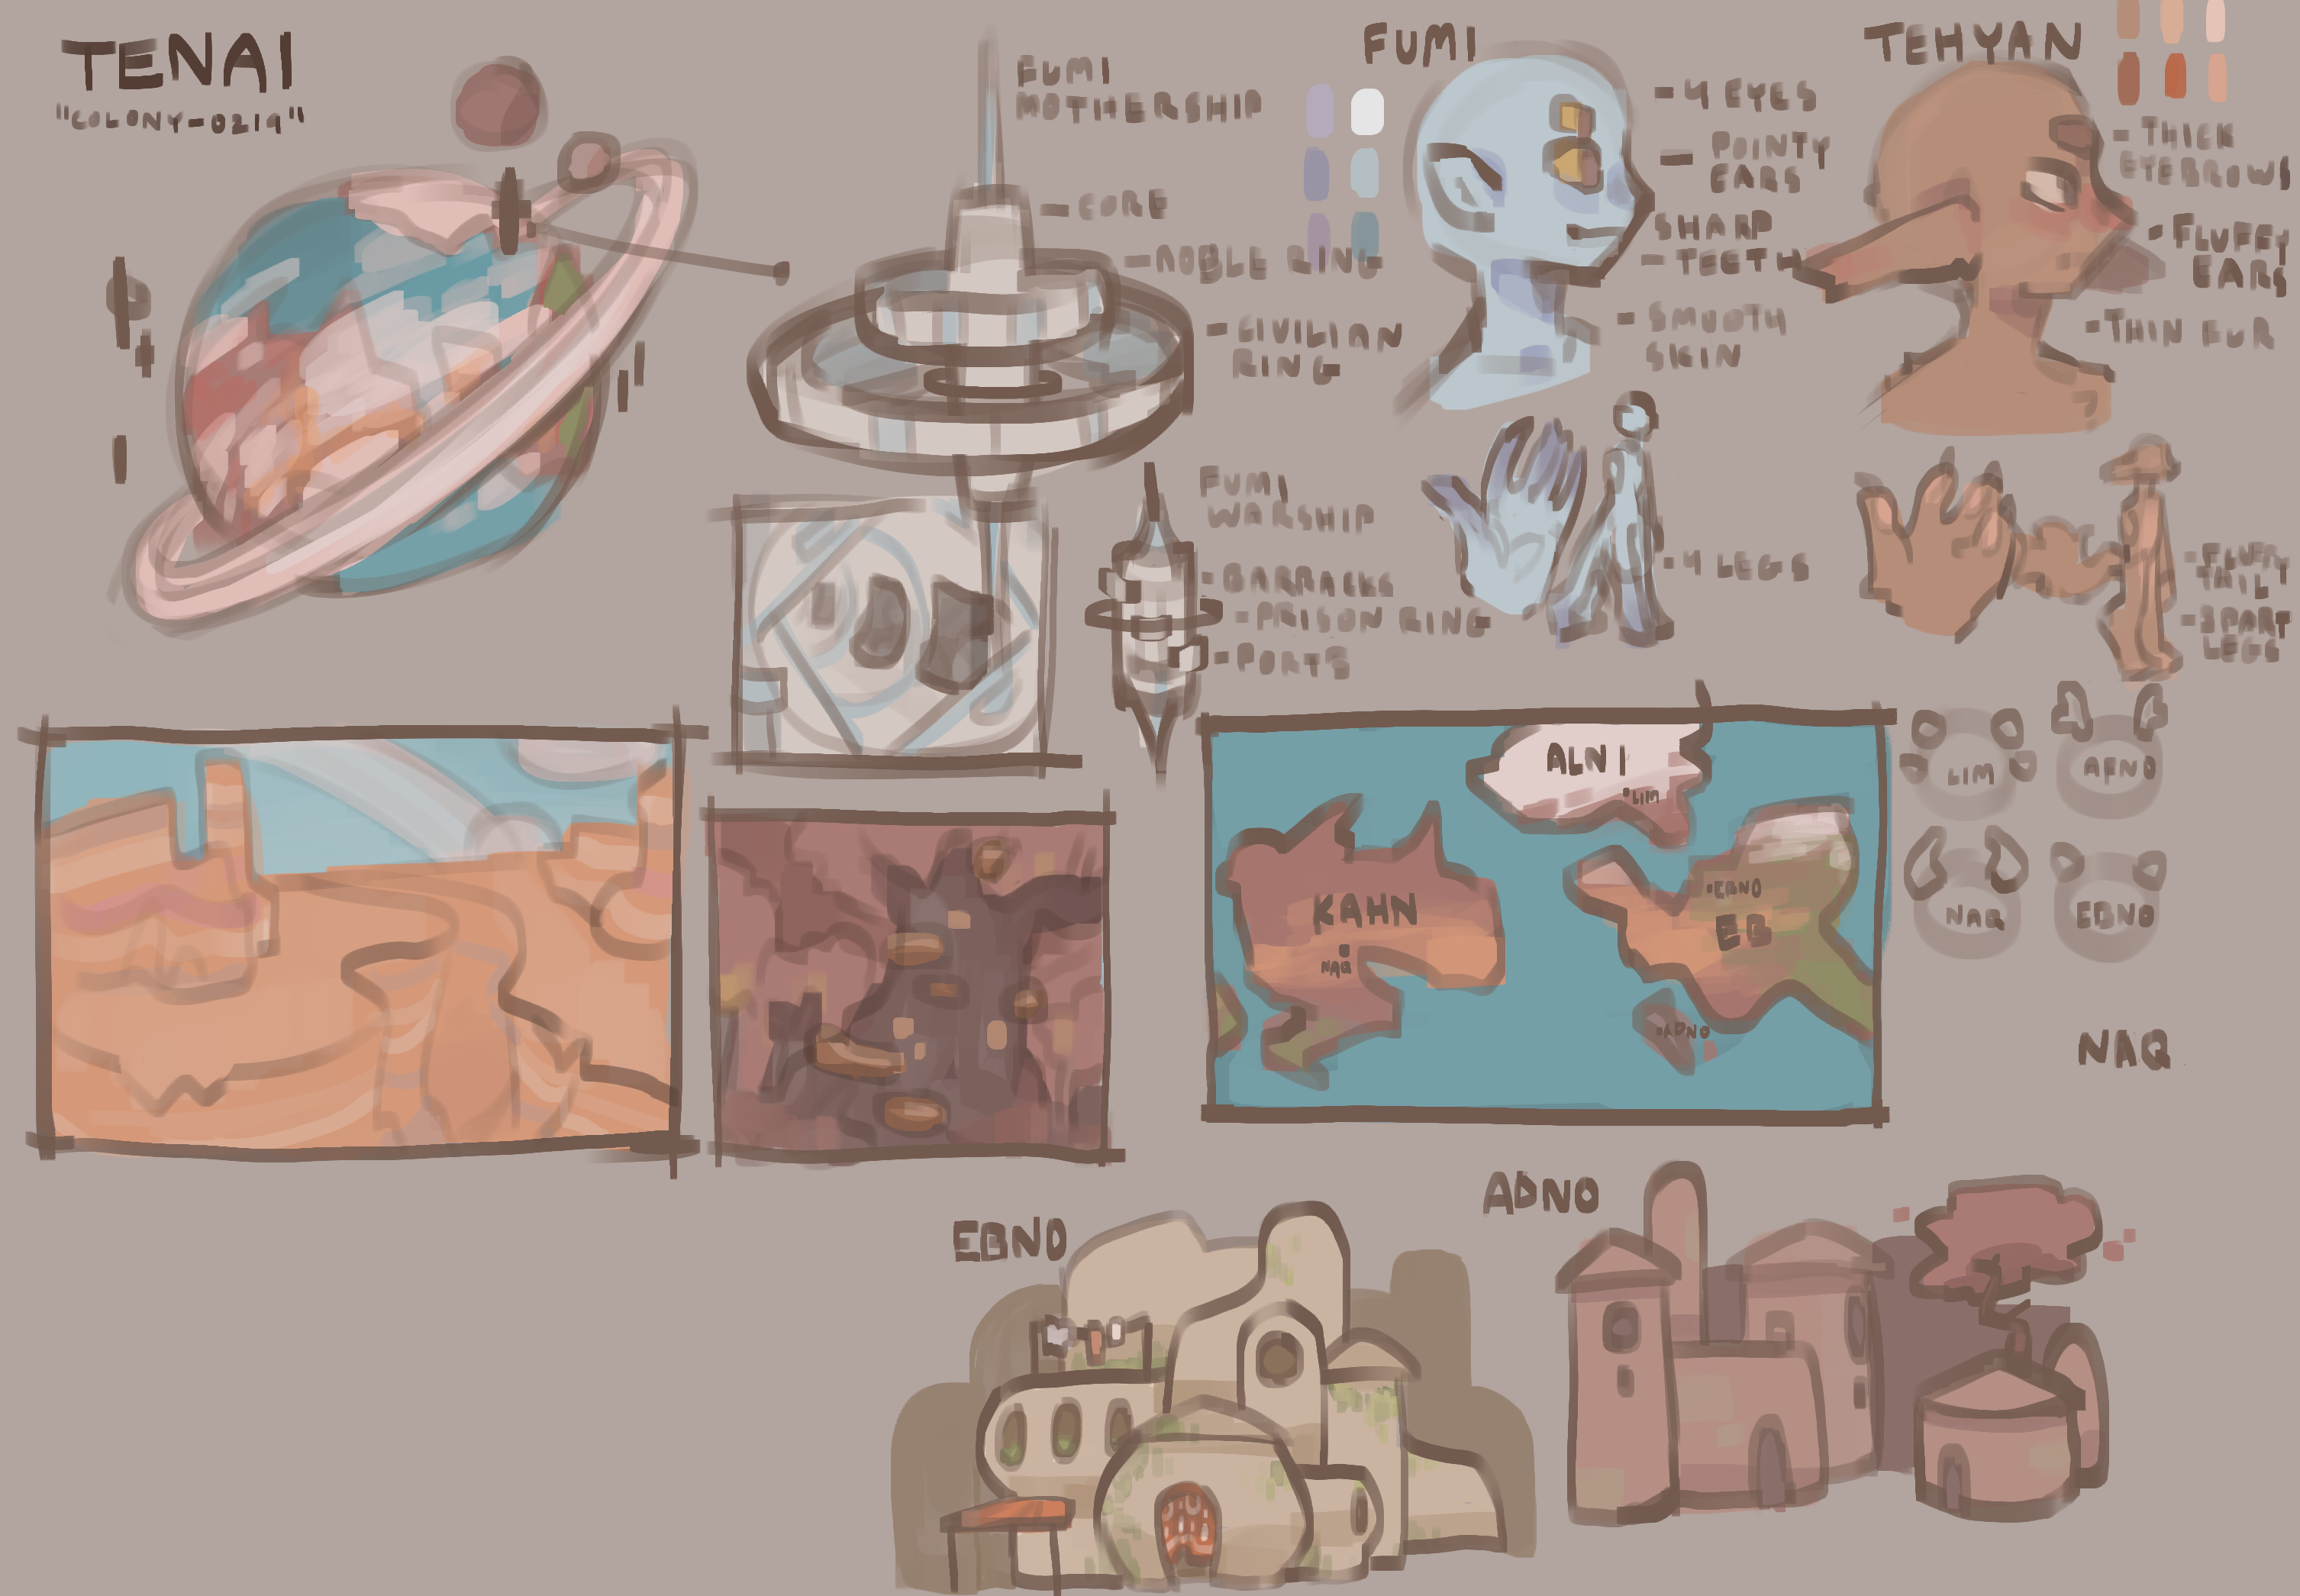 a messy sketch page showing the planet Tenai and a map of it, along with notes on the species and the Fumi ships